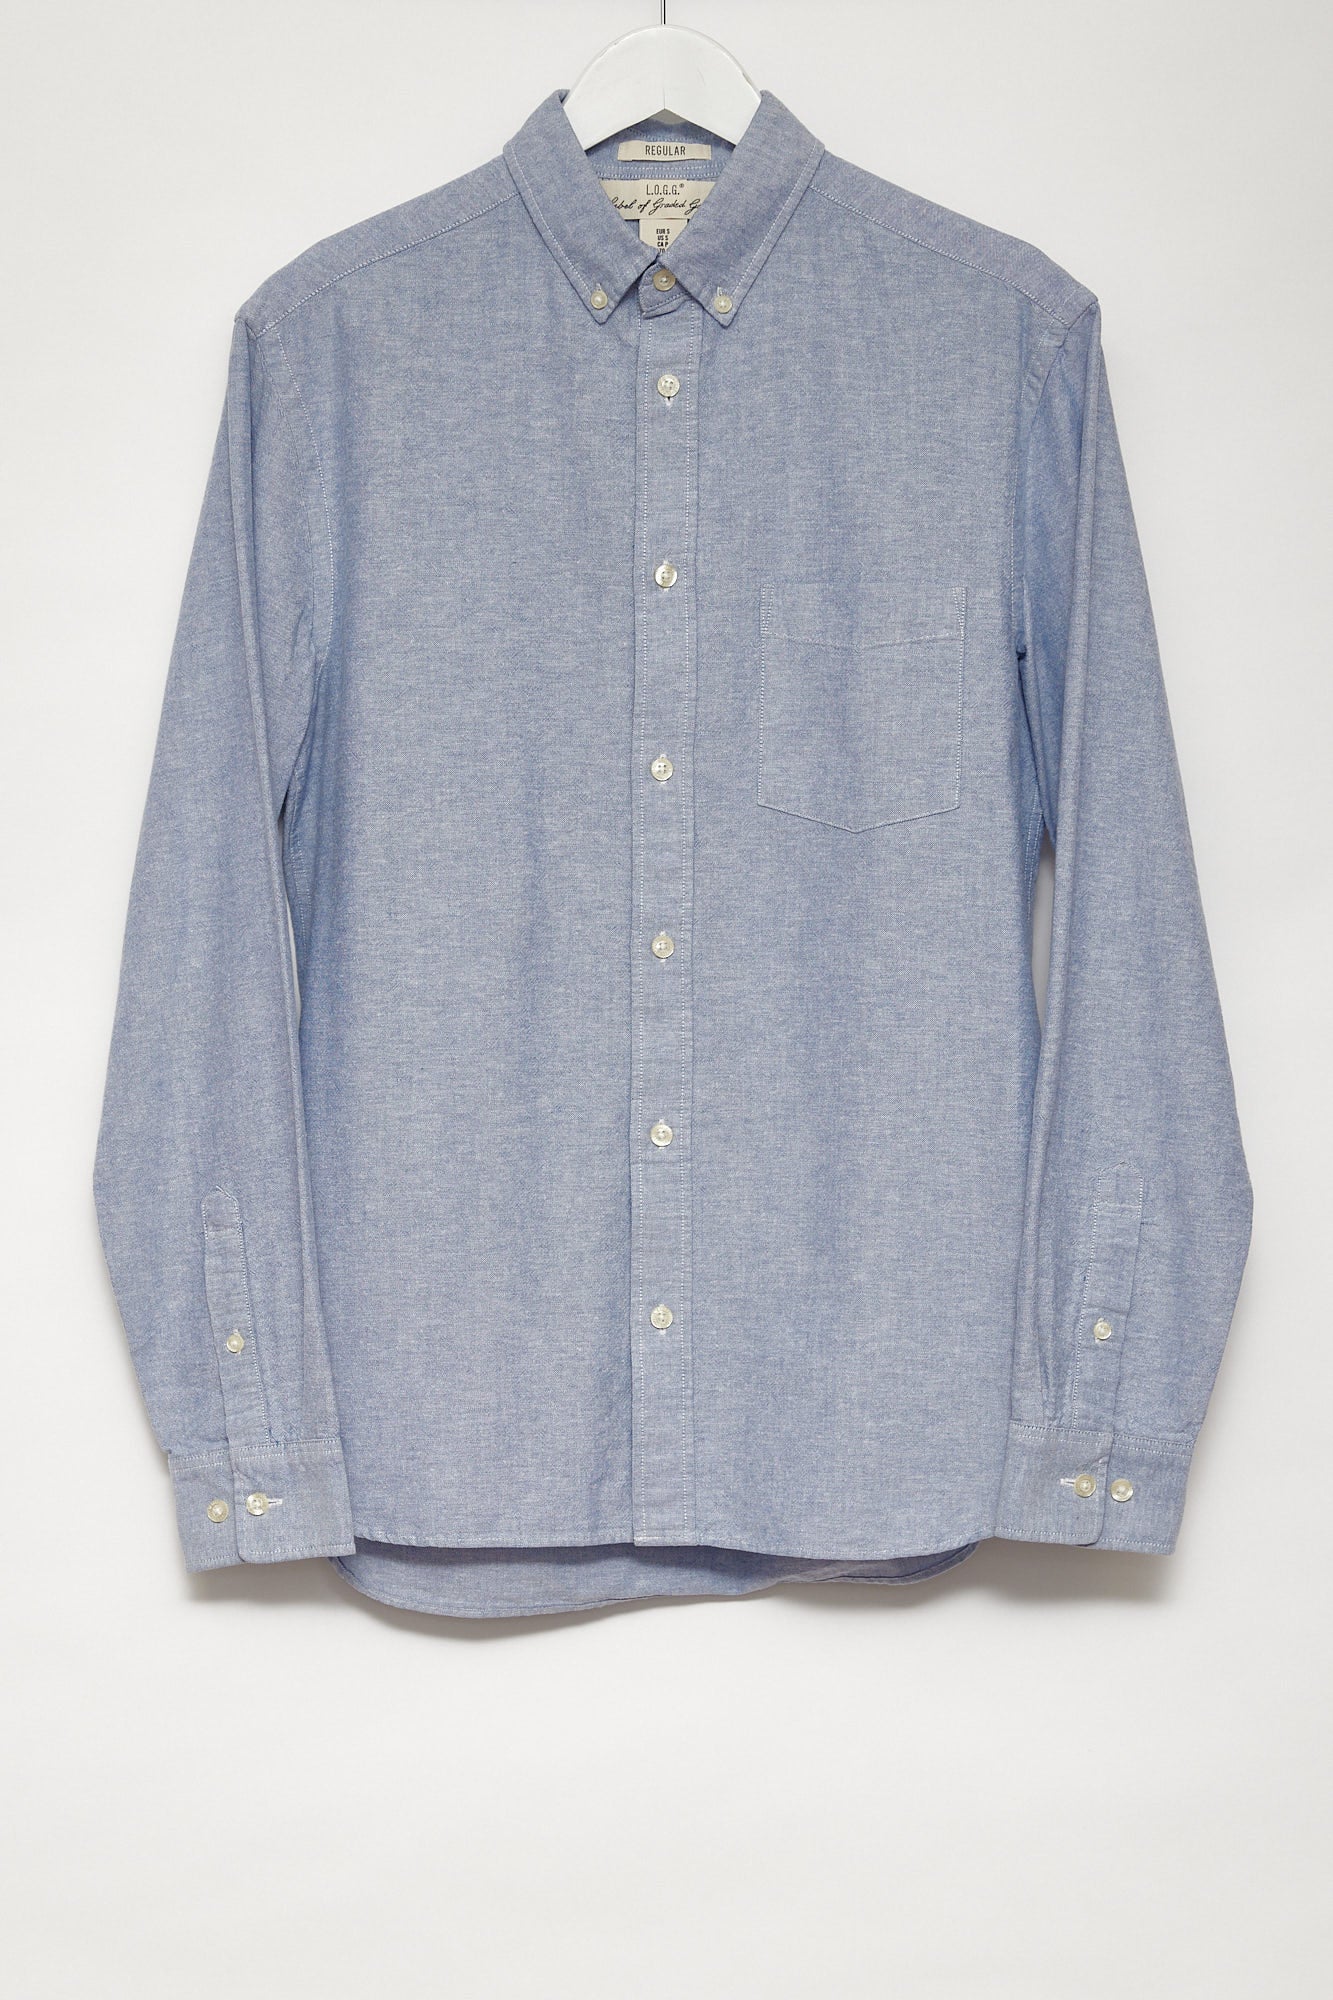 Mens H&M blue oxford shirt size small